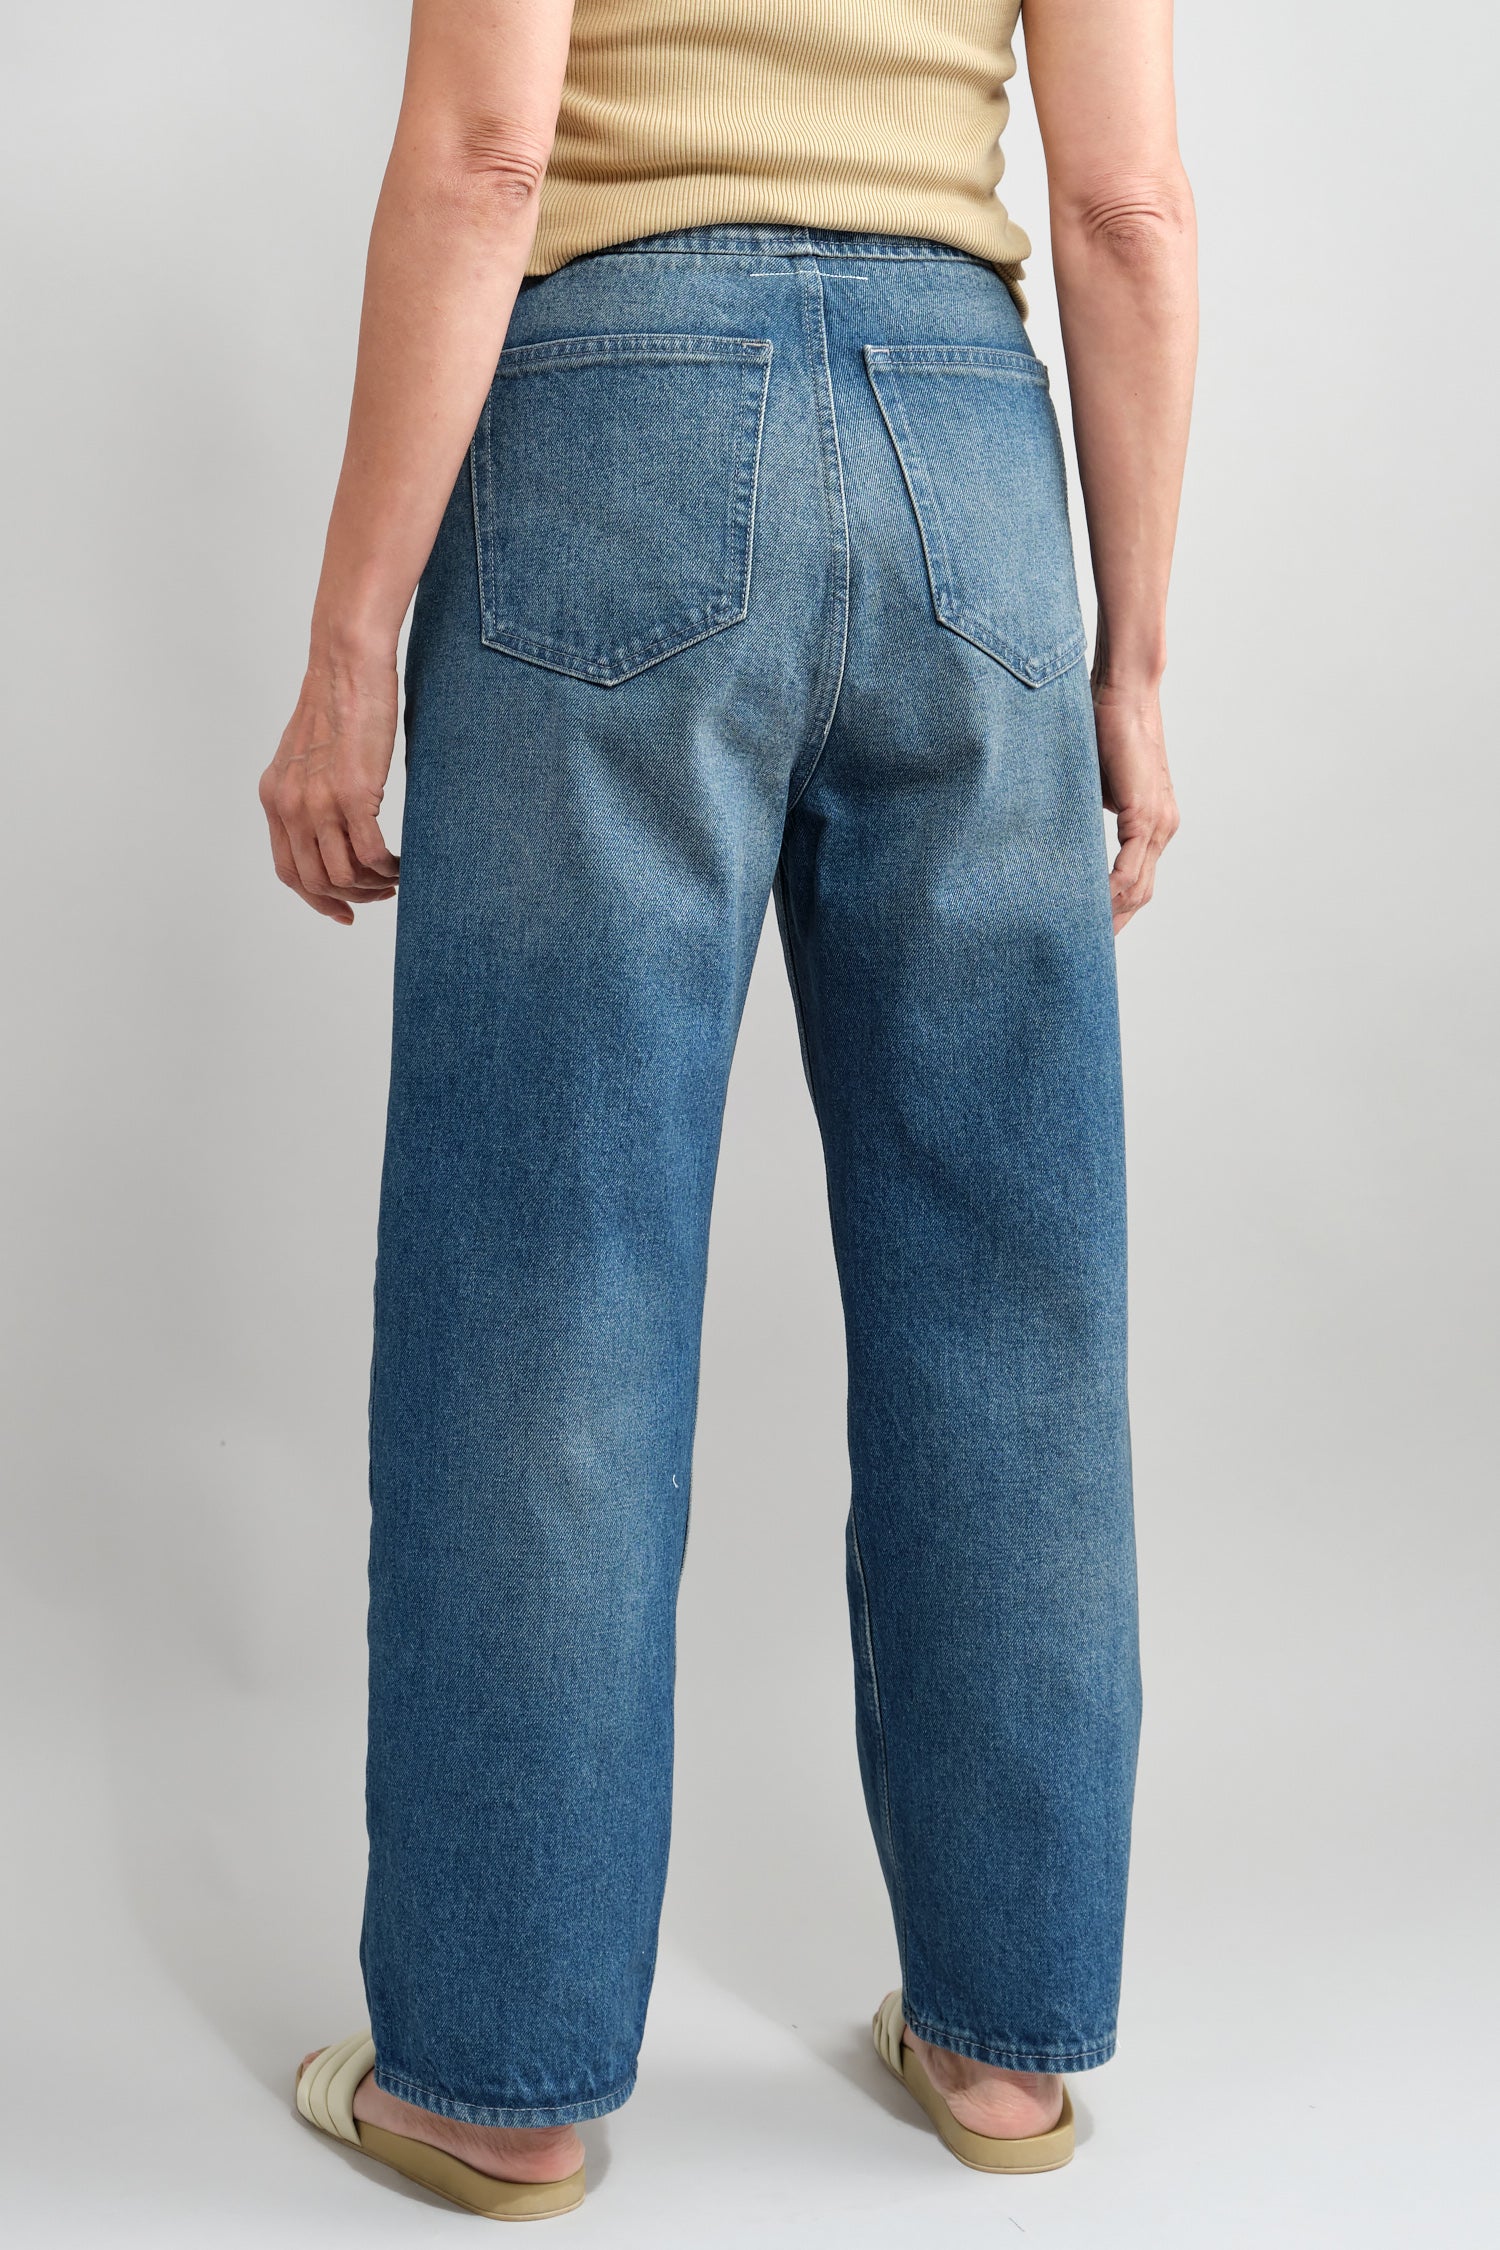 Back of Carrot Jeans in Medium Wash